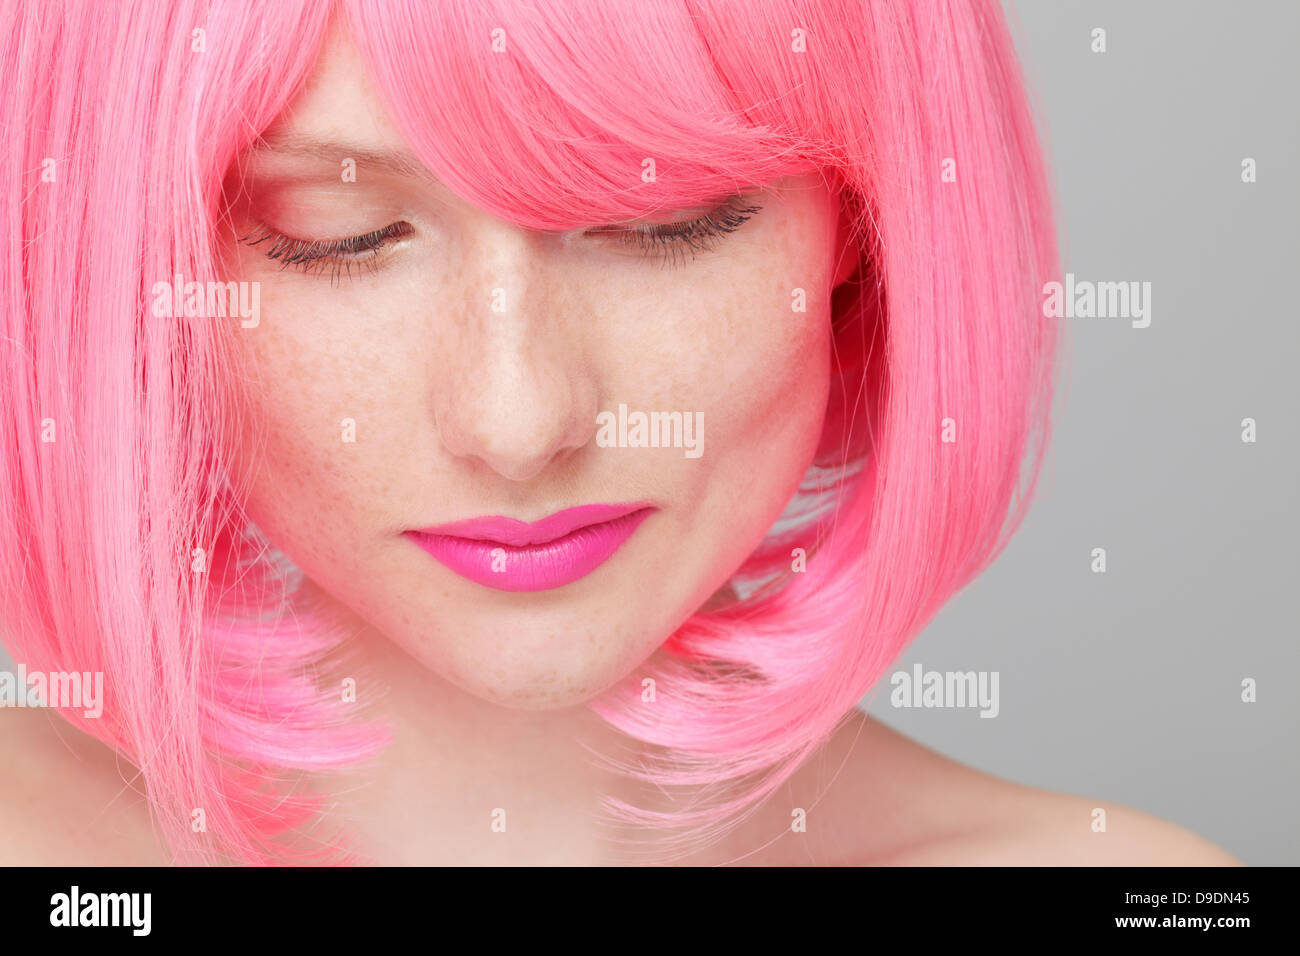 Close up of teenage girl with pink hair Stock Photo